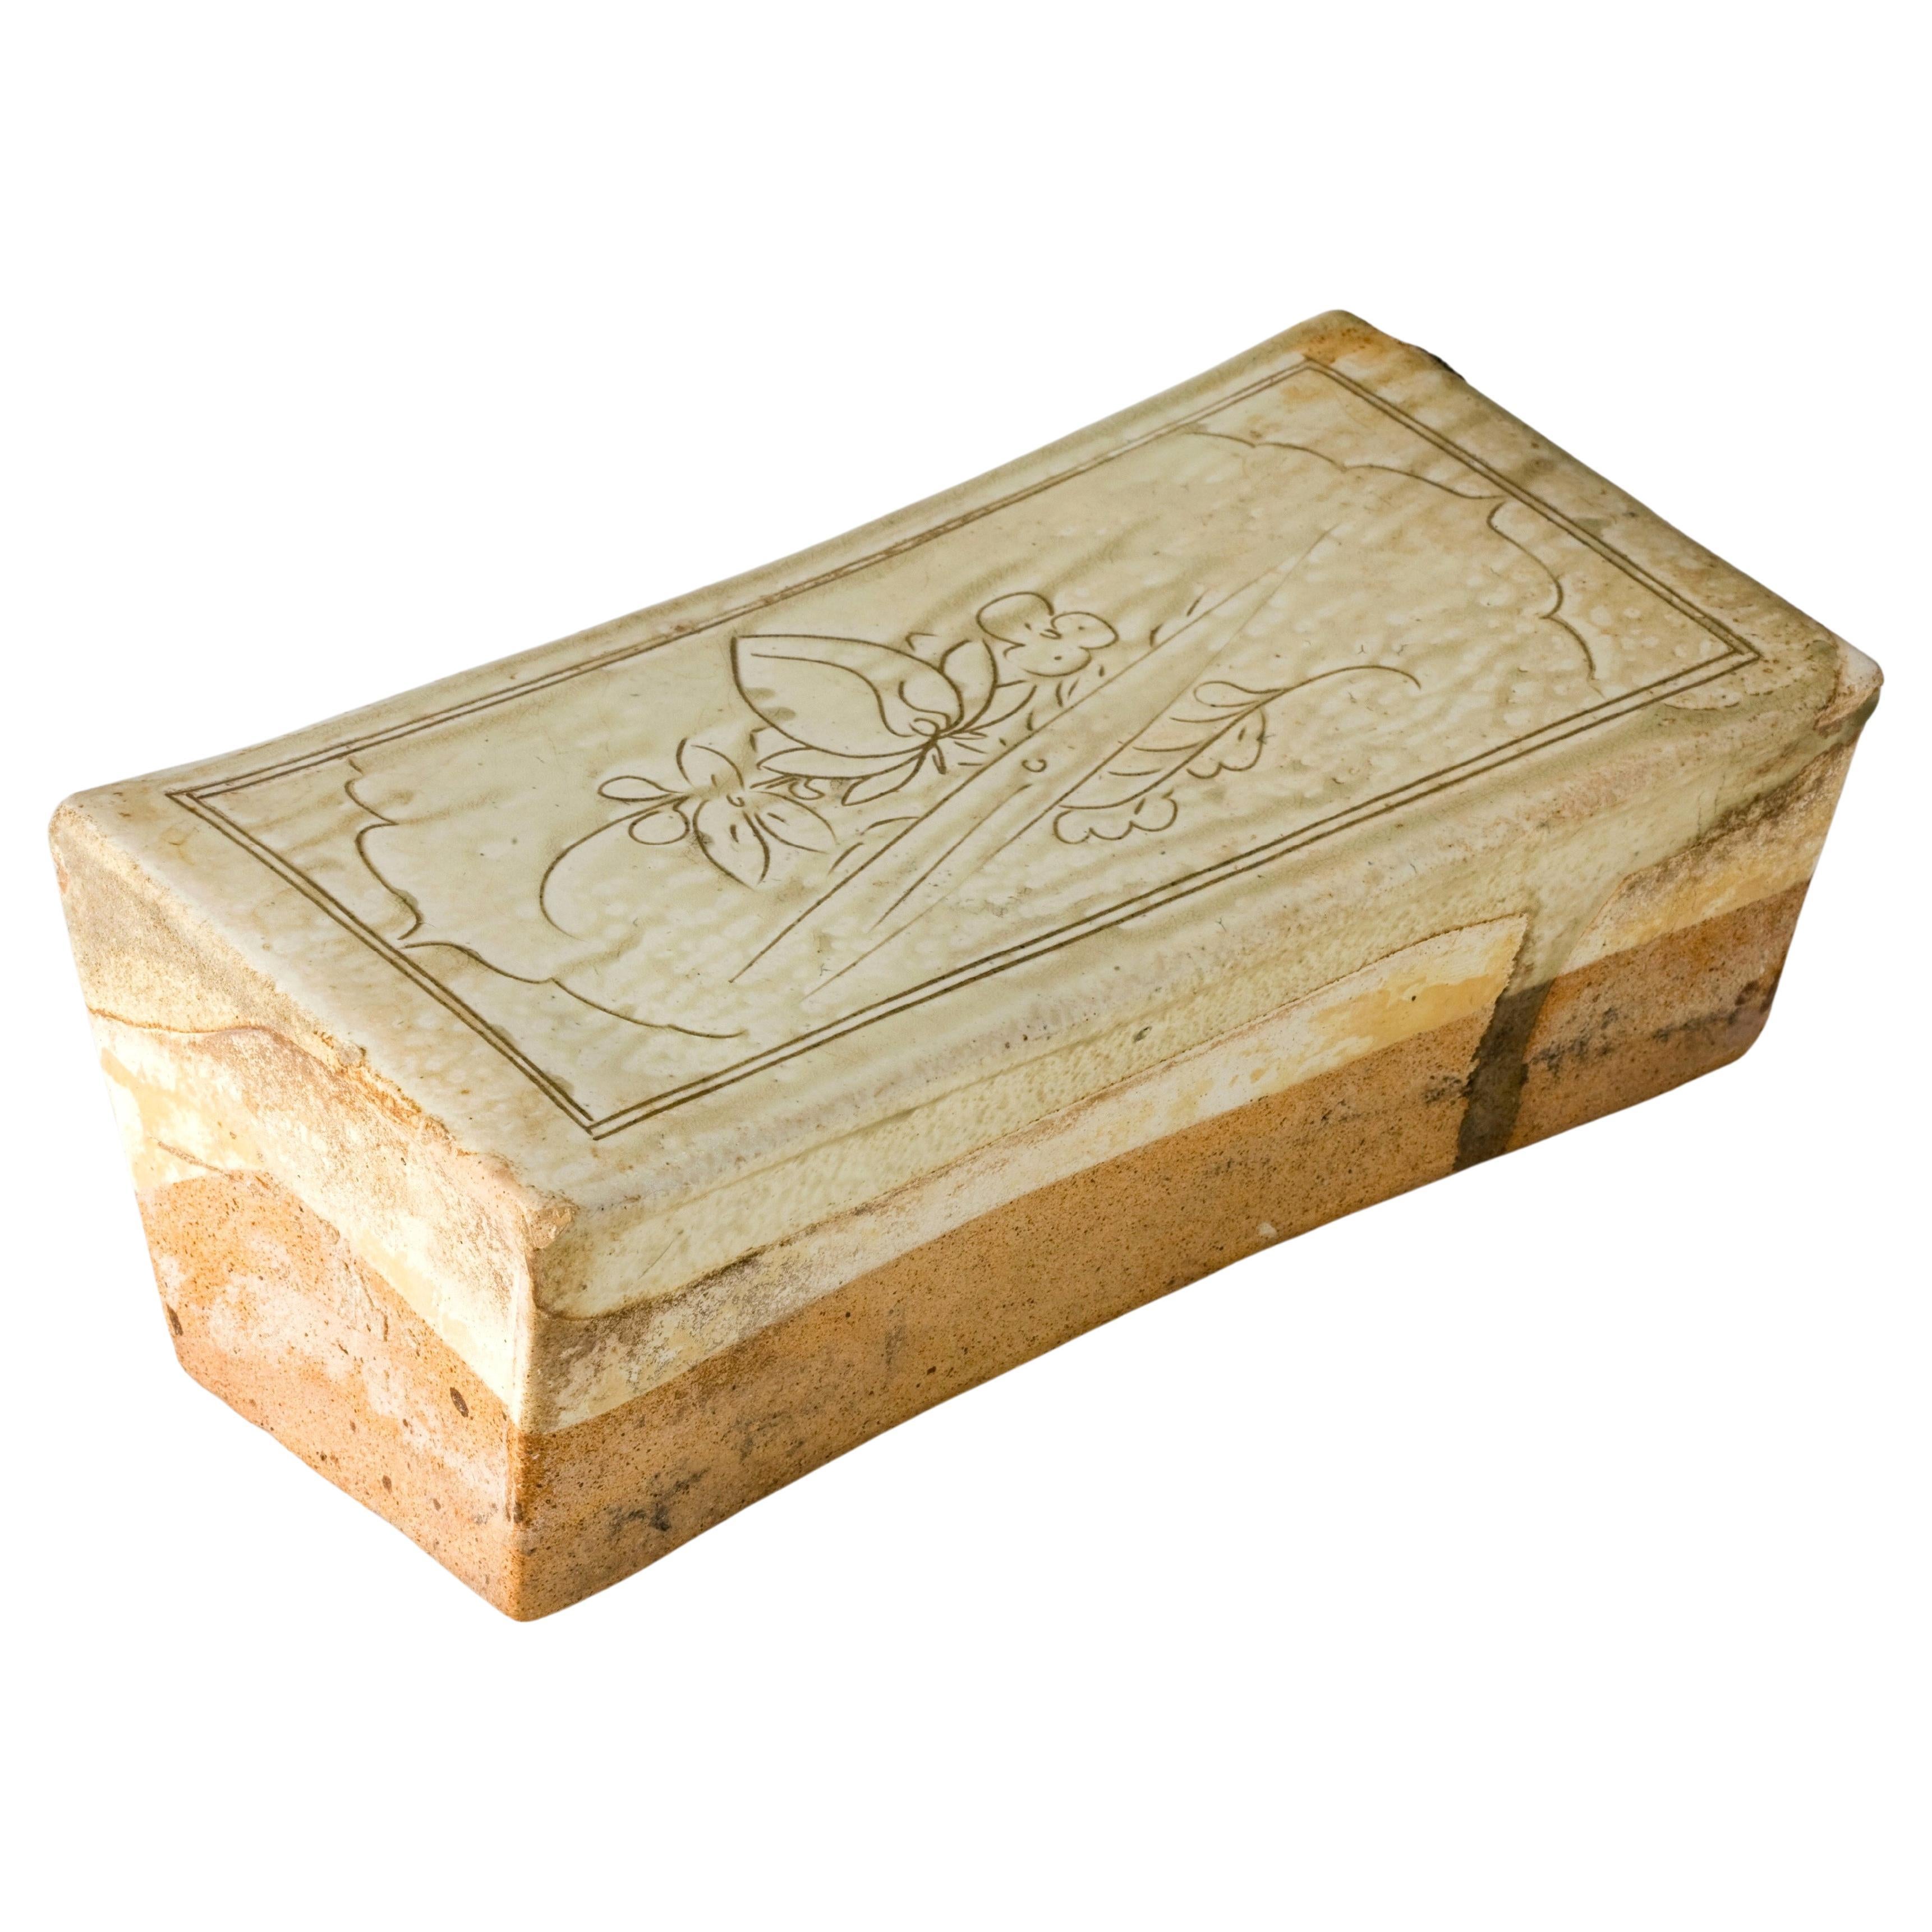 Cizhou Rectangular Pillow with Carved Decoration, Yuan Dynasty For Sale